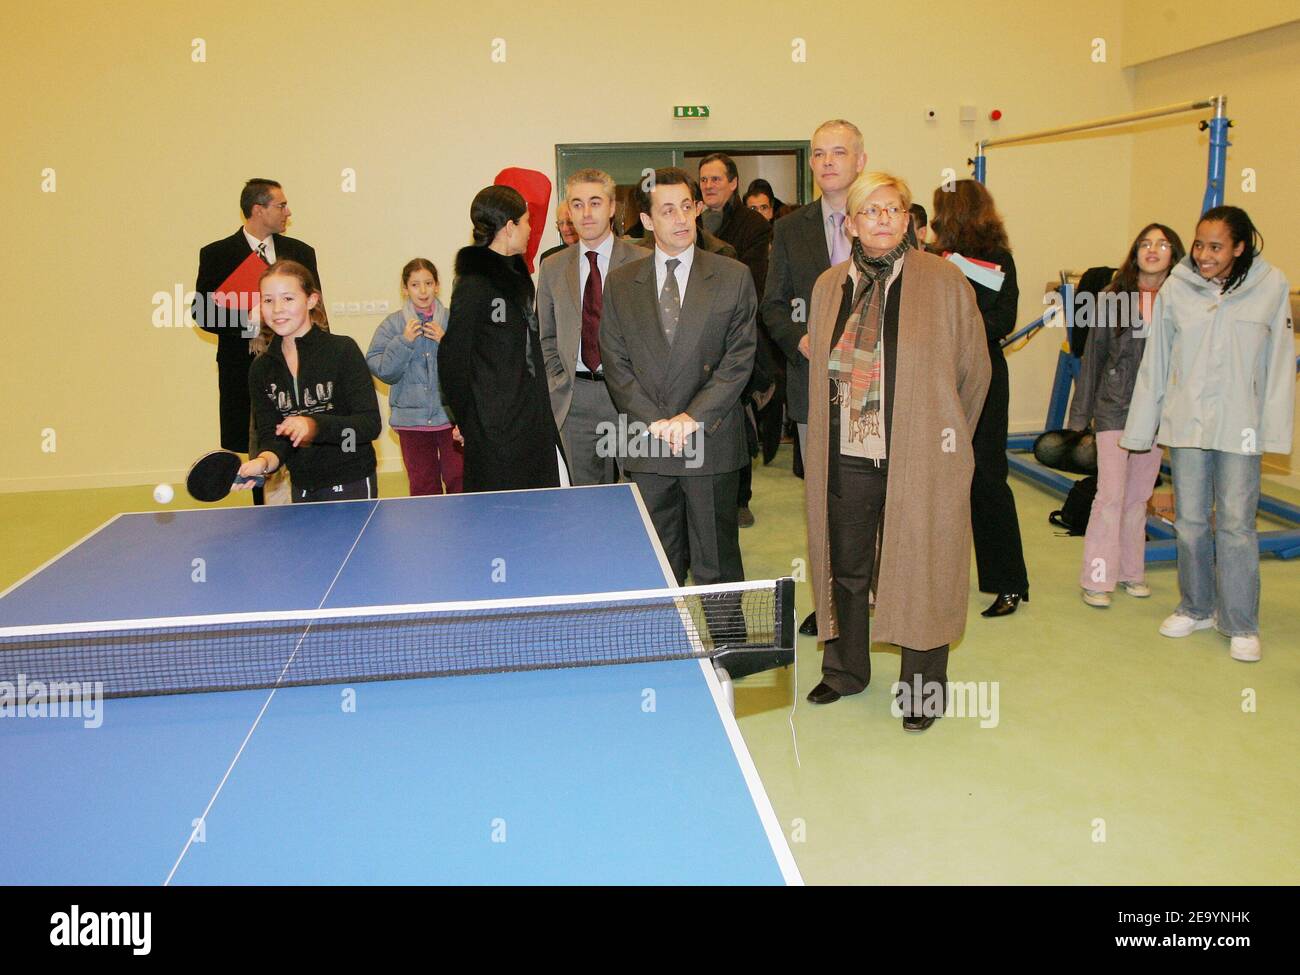 Nicolas Sarkozy (C), as President of the Hauts-de-Seine General Council, with Asnieres mayor Manuel Aeschlimann (L) and Vice-President Isabelle Balkany (R), meets teachers and students of the 4th College in Asnieres, near Paris, France, on January 17, 2005, as part of his decision to visit every week one city of his department. Photo by Mousse/ABACA. Stock Photo